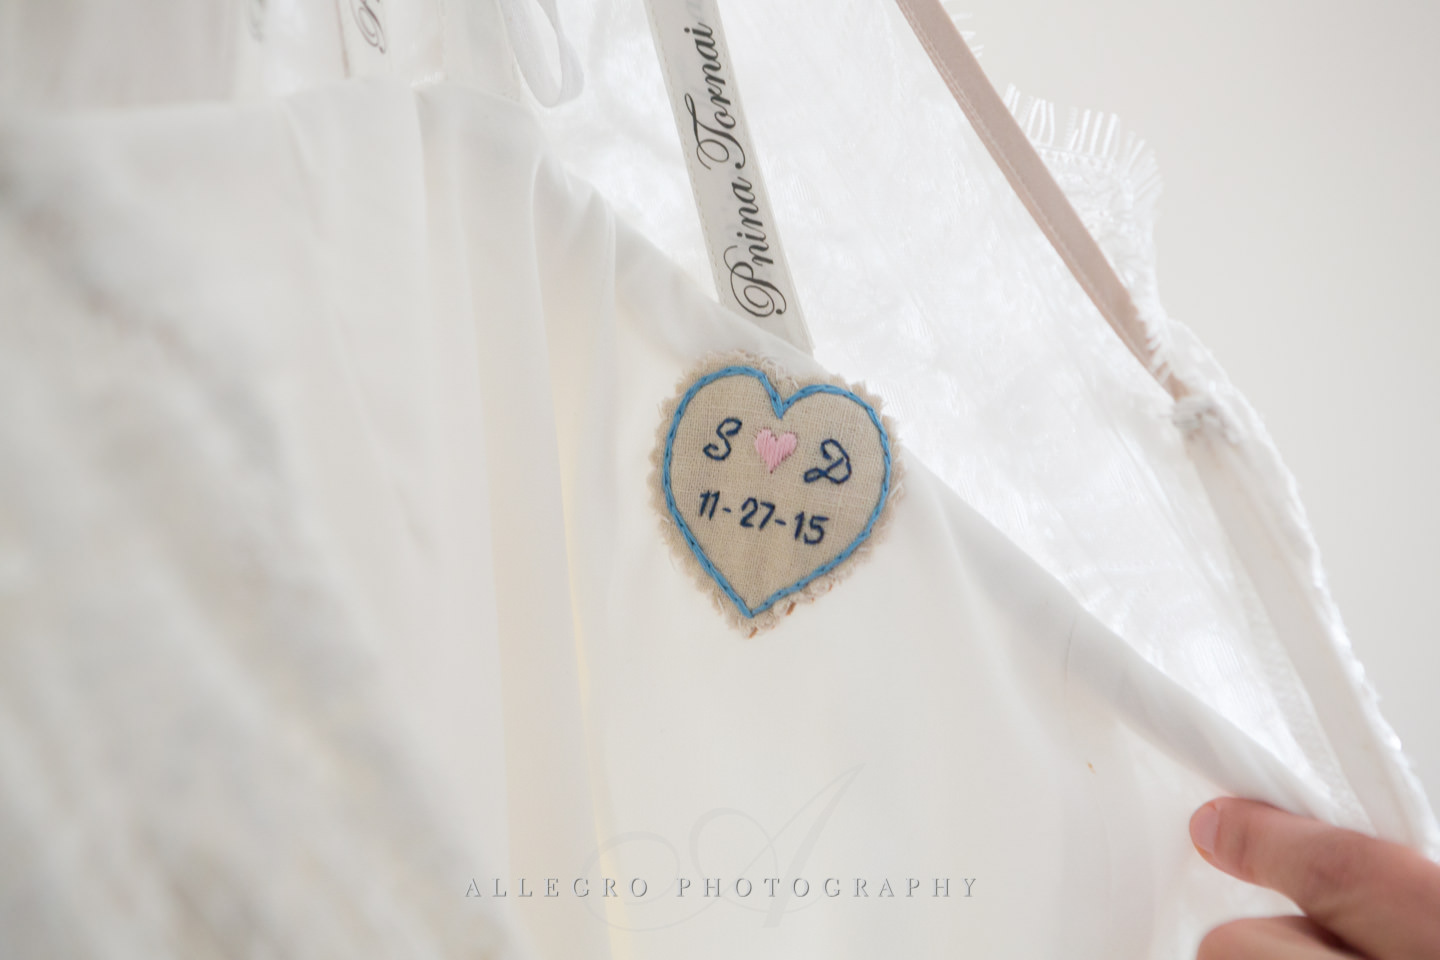 sewn in details with remembrance of wedding date -photo by Allegro Photography